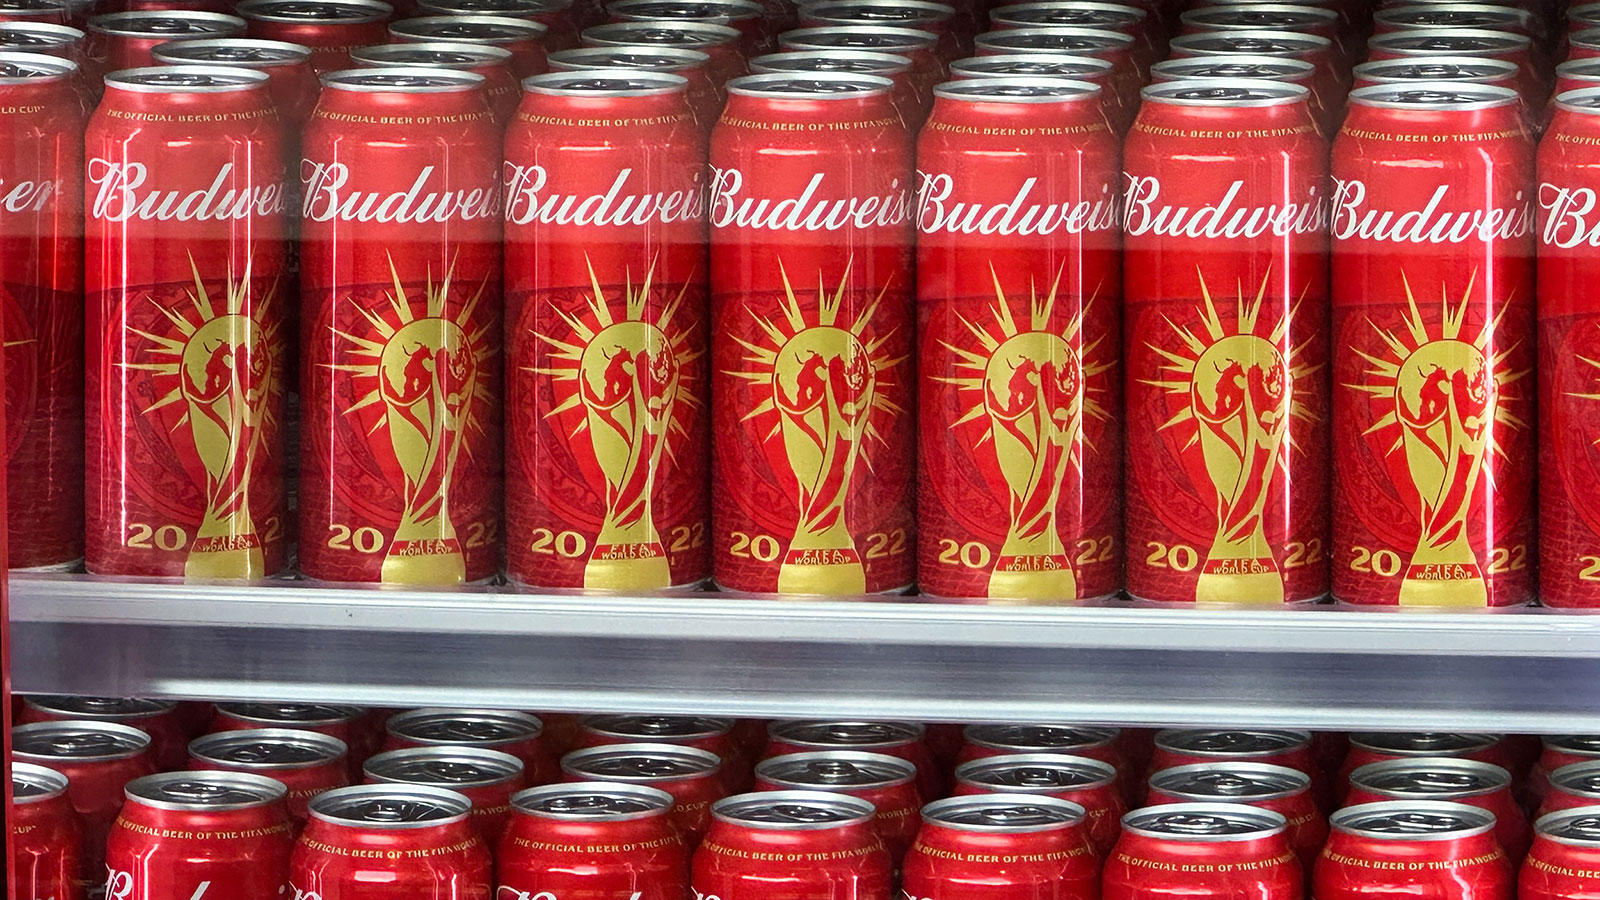 Cans of Budweiser beer are seen in Doha on November 18.